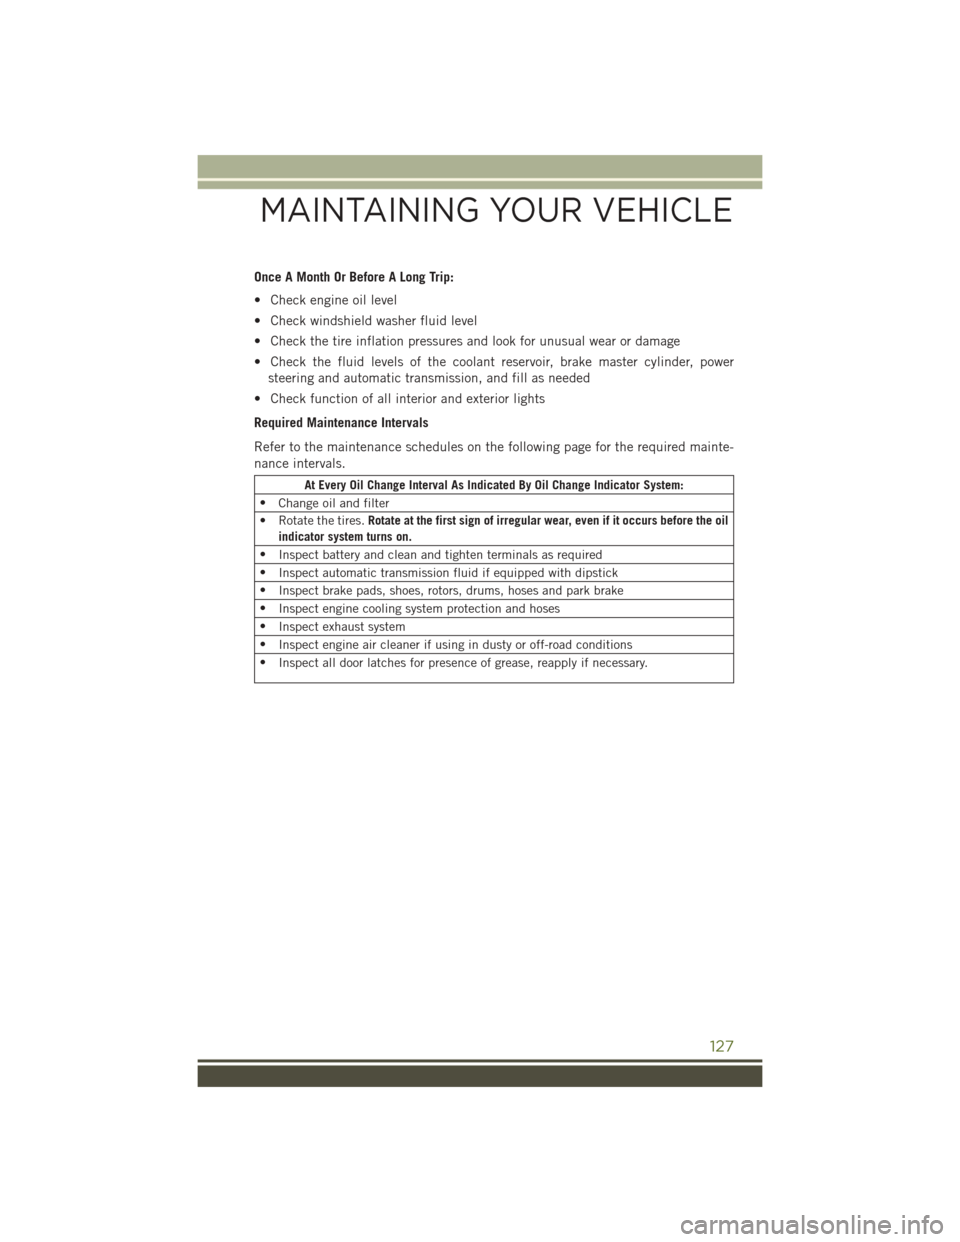 JEEP WRANGLER 2016 JK / 3.G User Guide Once A Month Or Before A Long Trip:
• Check engine oil level
• Check windshield washer fluid level
• Check the tire inflation pressures and look for unusual wear or damage
• Check the fluid le